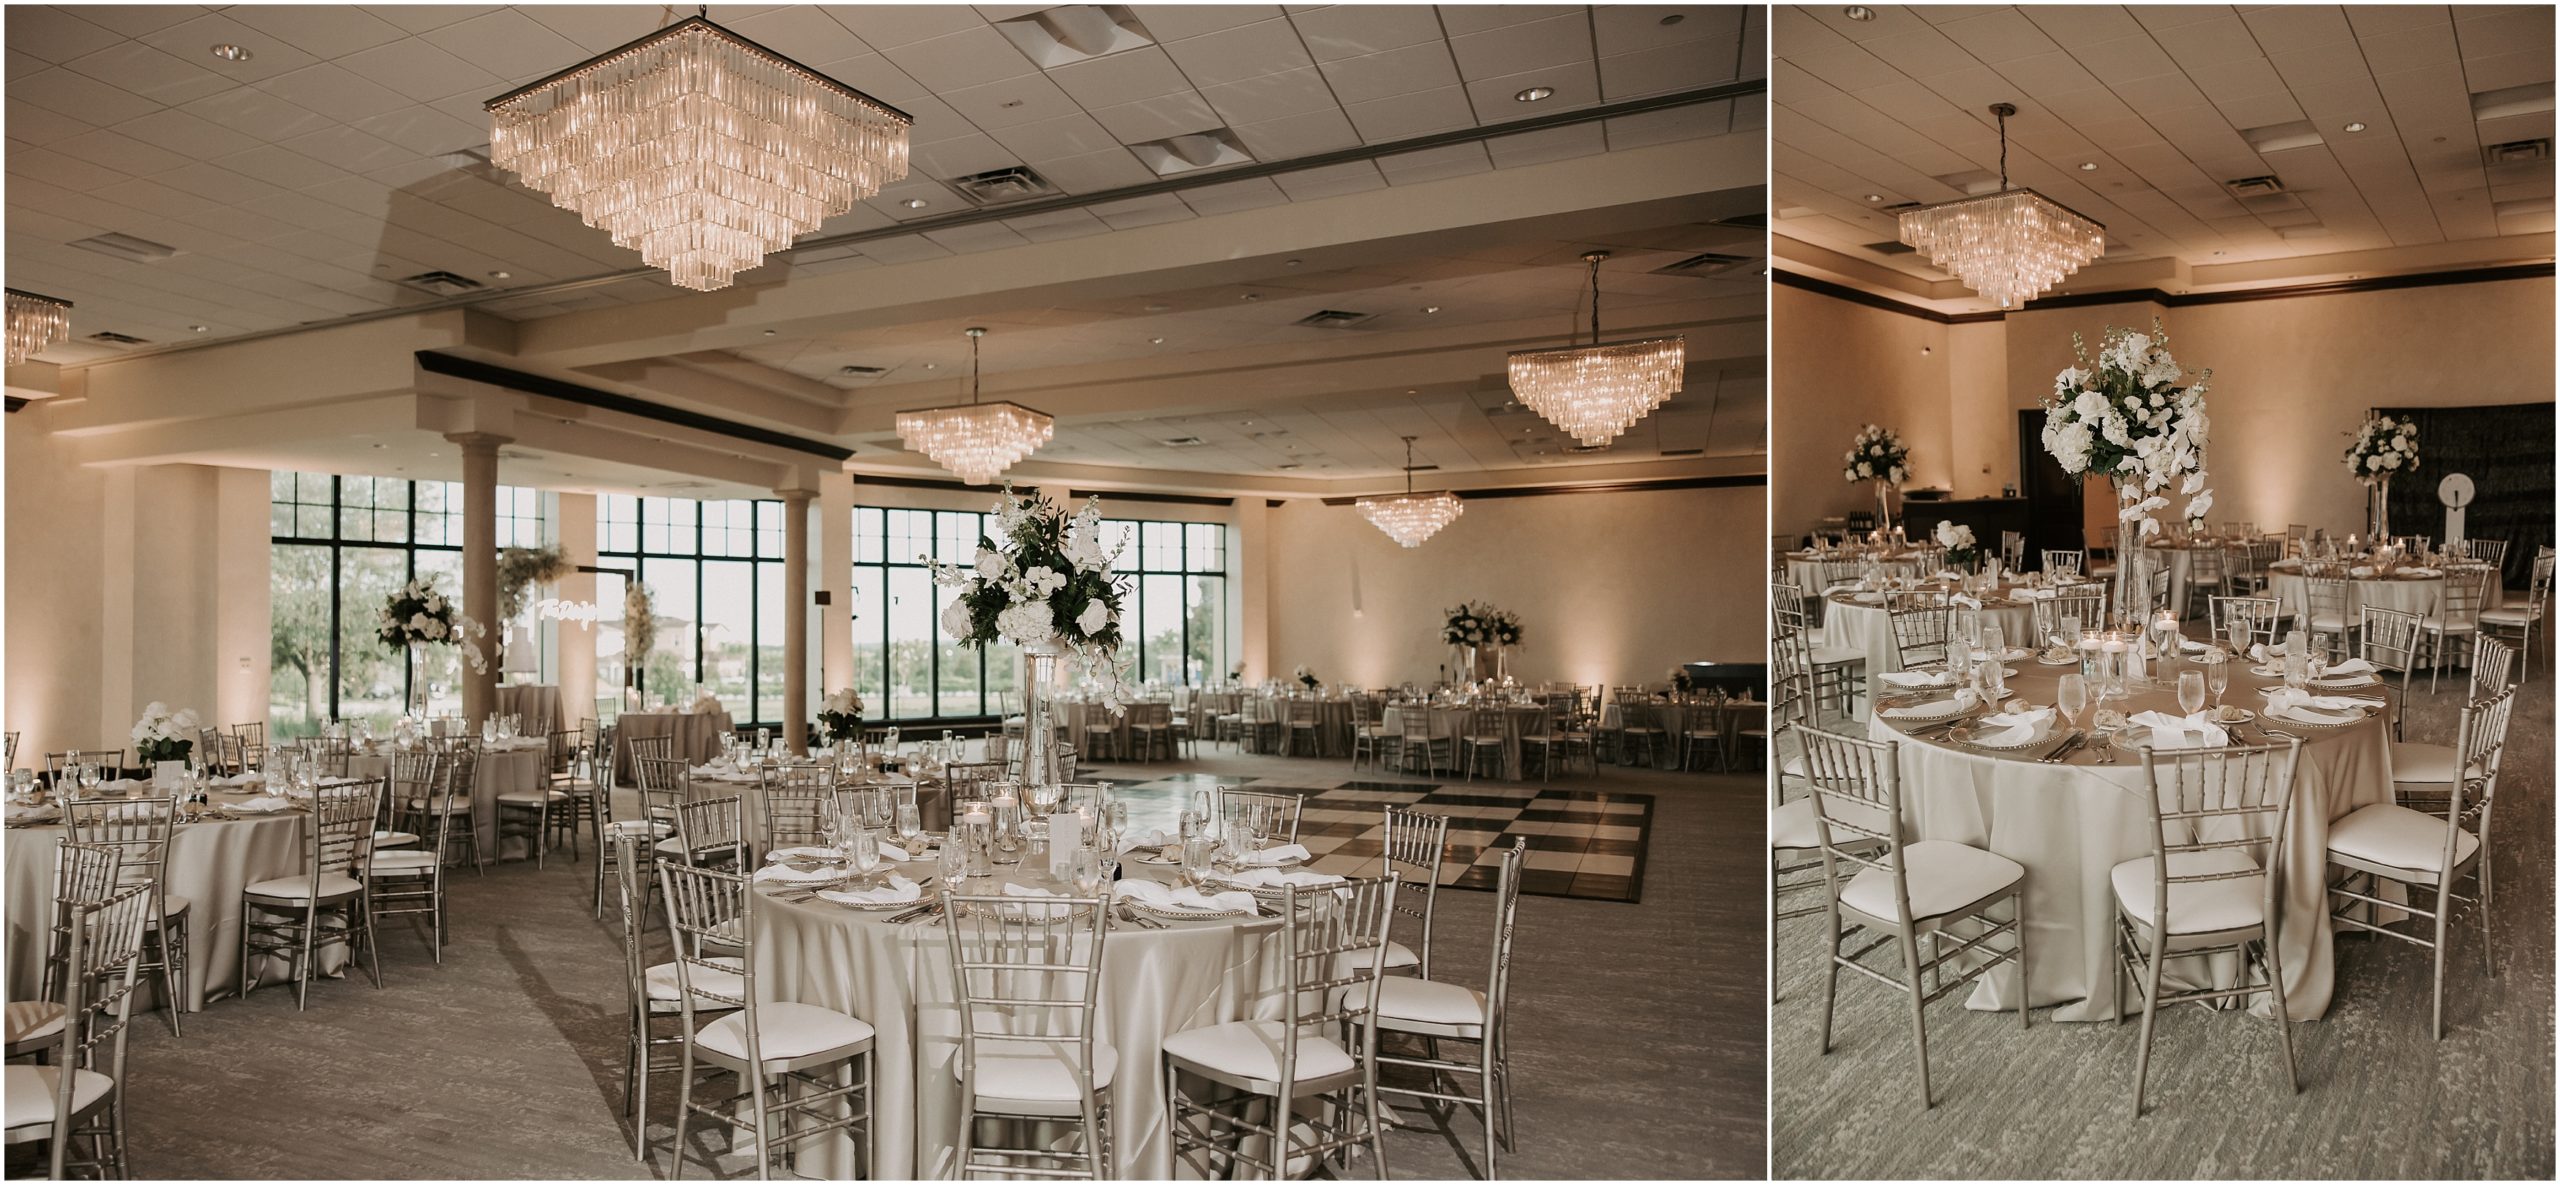 They designed their special elegant and timeless wedding day together with Bella Sposa Events who had everything established and under control. Accordingly, everything went like they planned.